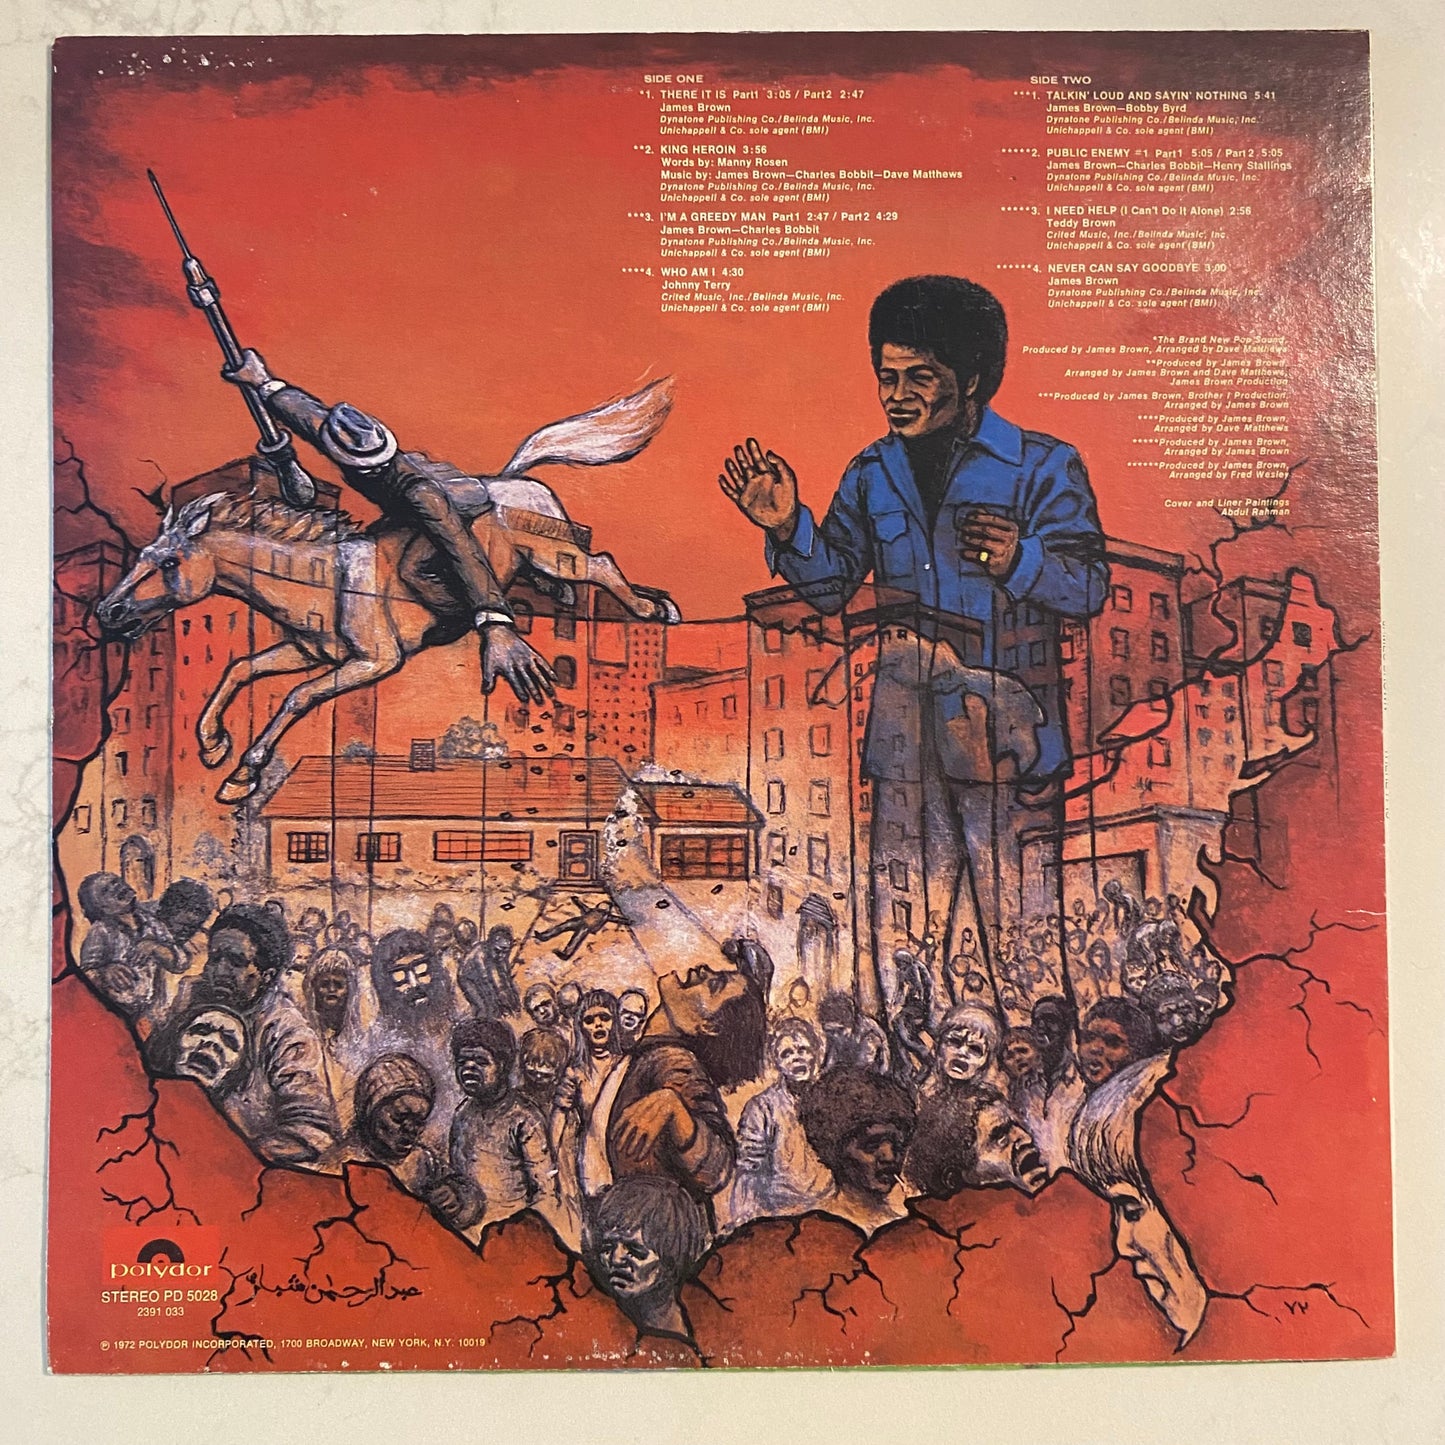 James Brown - There it Is (LP, Album)